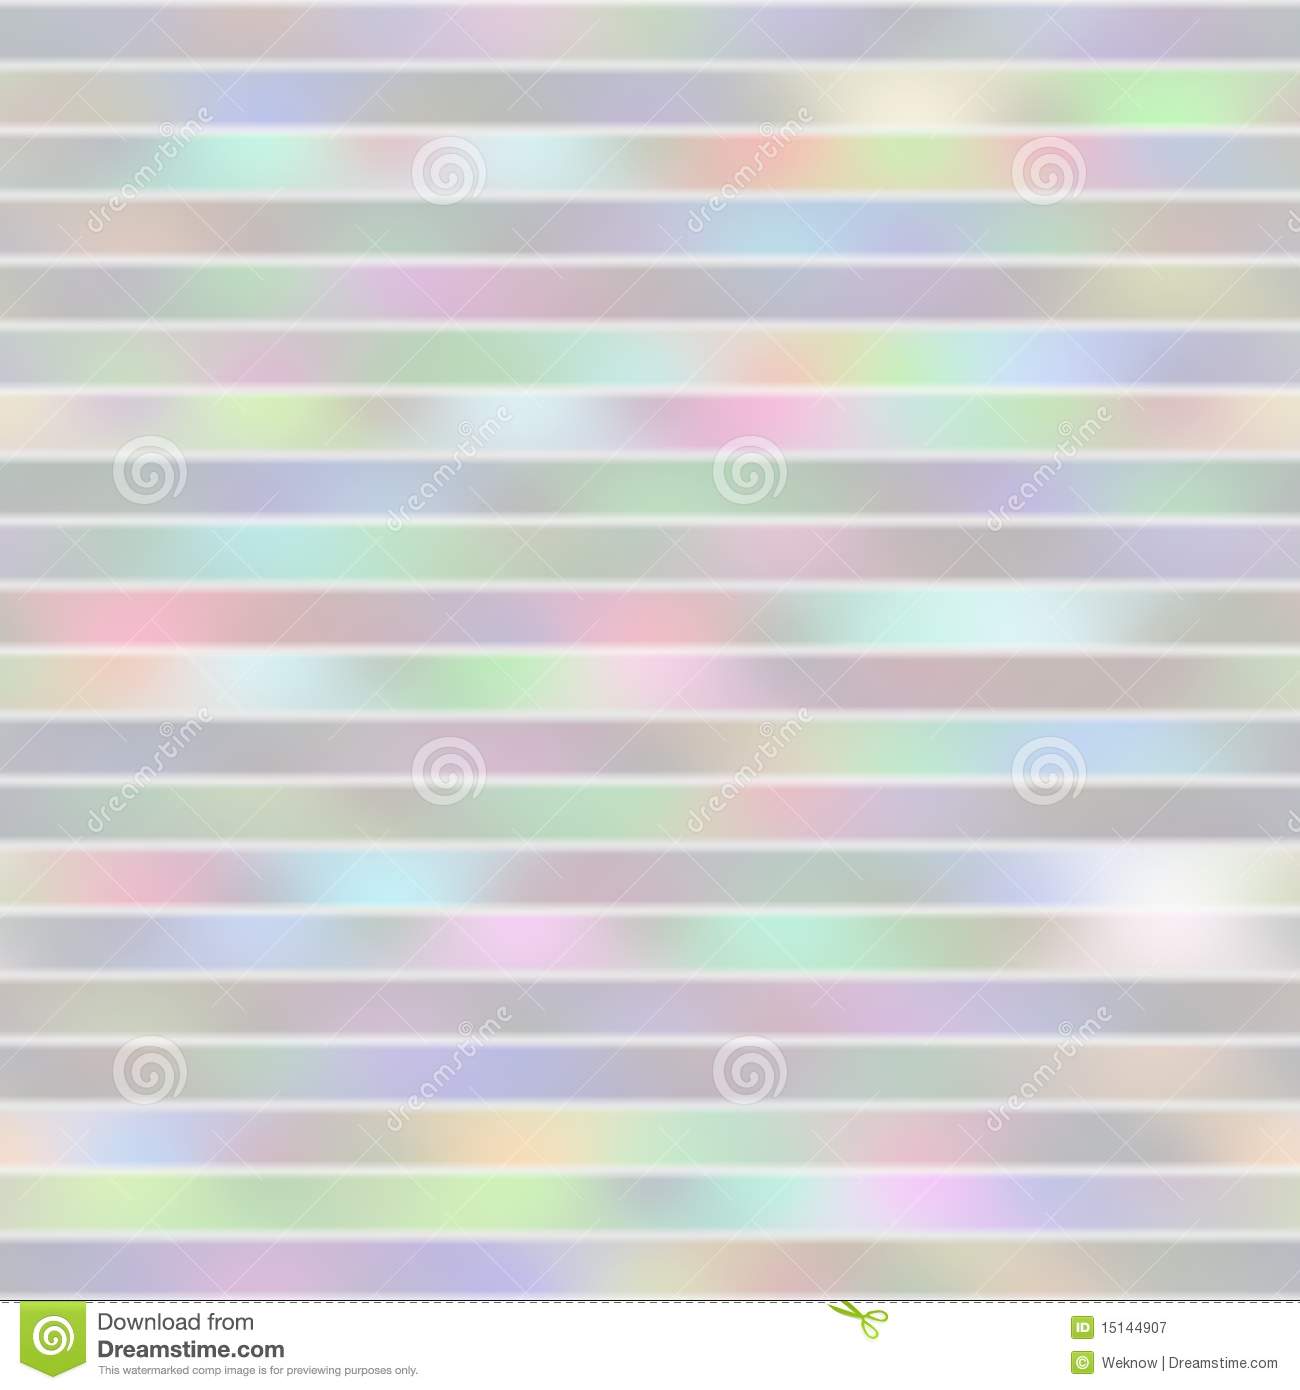 Pastel Glow Lines Royalty Free Stock Photography   Image  15144907